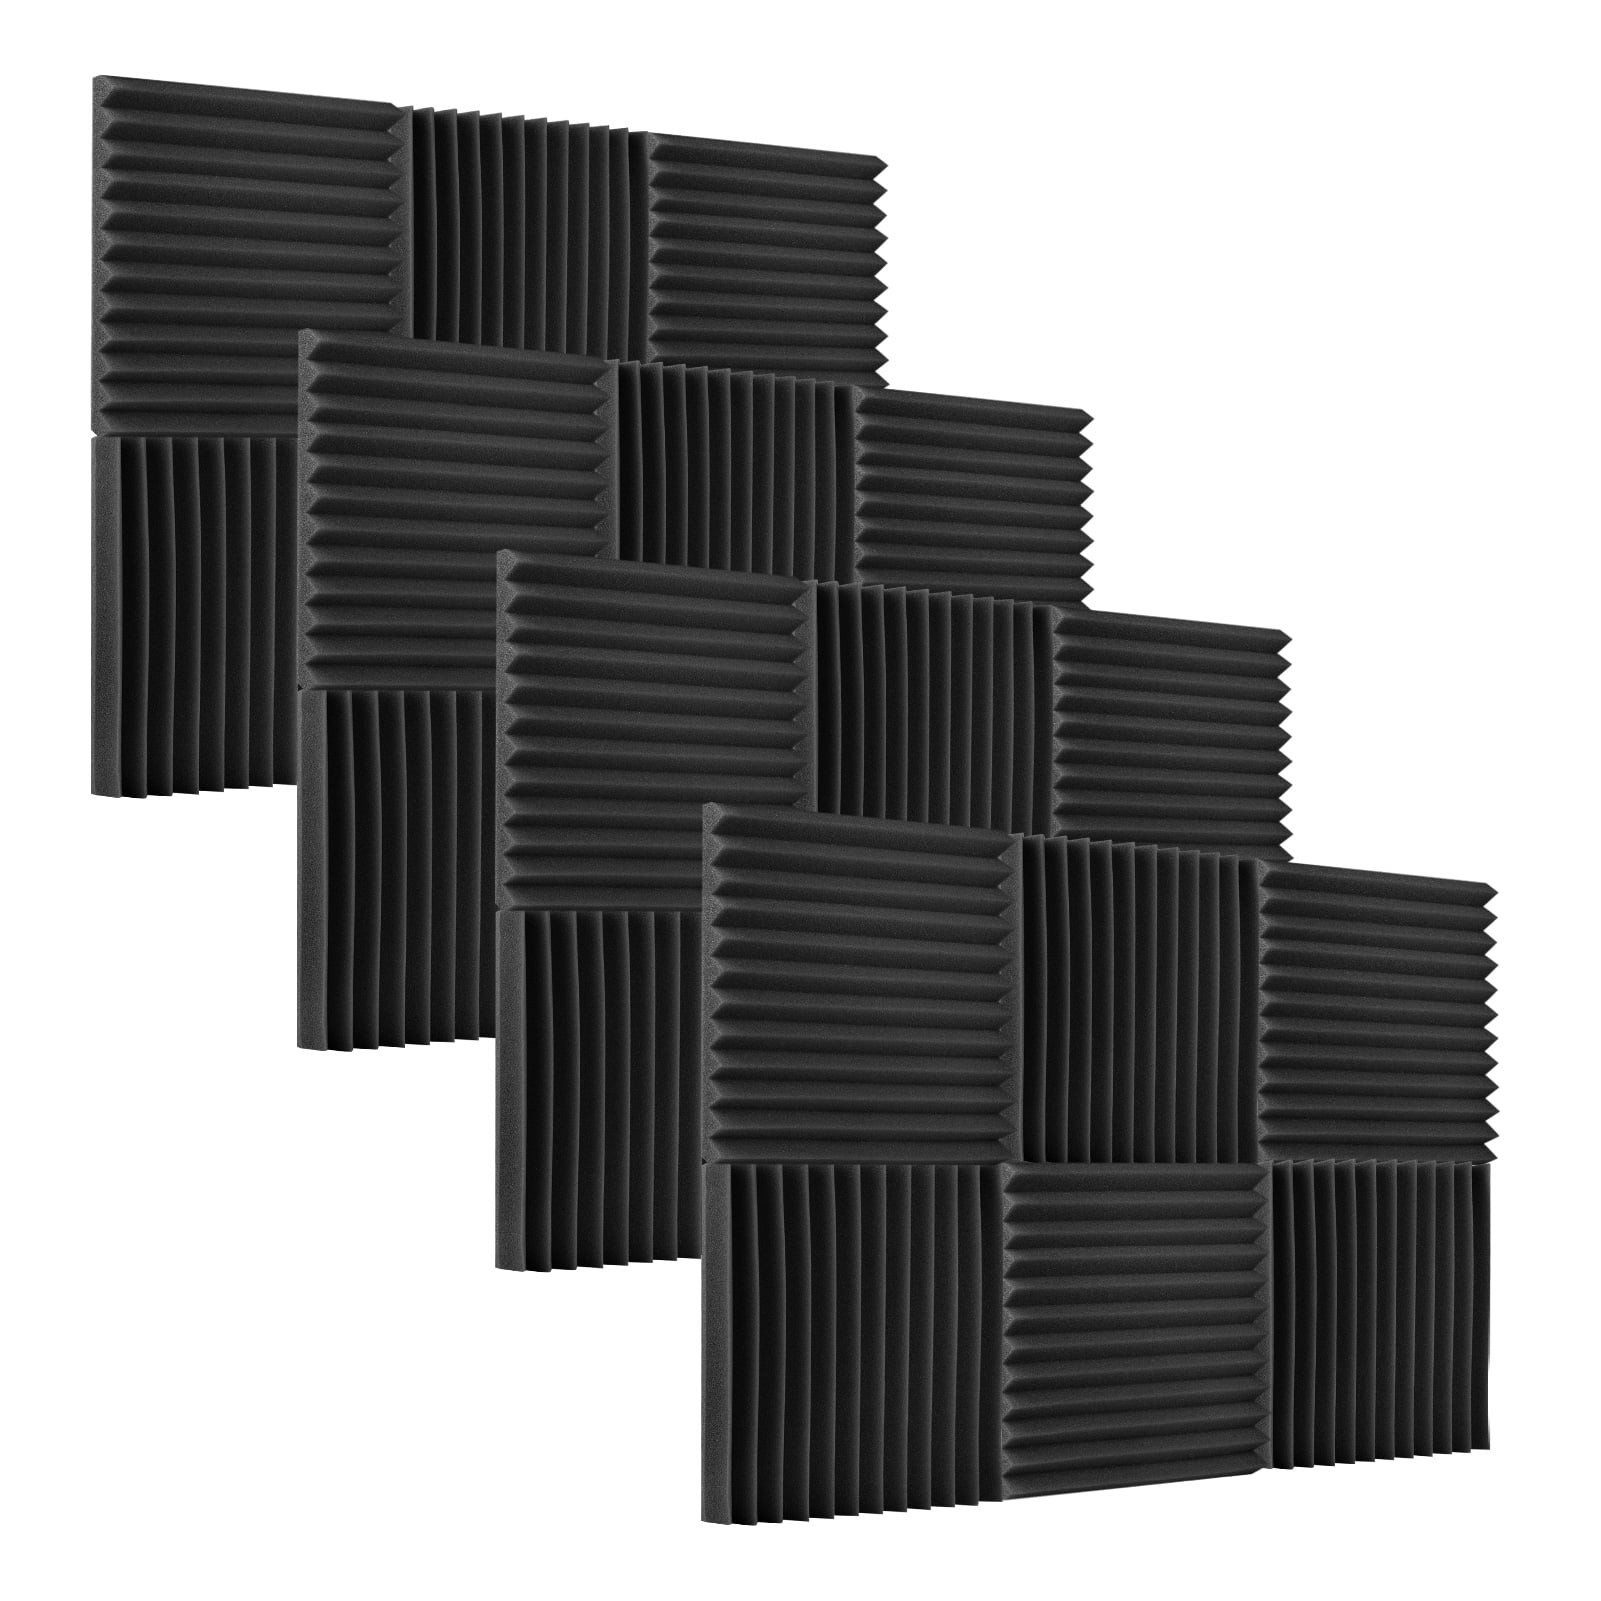 Beveled Edge 2x12x12 Soundproofing Acoustic Foam Fireproof Studio Sound Absorption Pyramid Treatment High Density Wall Padding Foam Wedge Tiles Sound Blocking/Absorbing/Noise Dampening Foam 